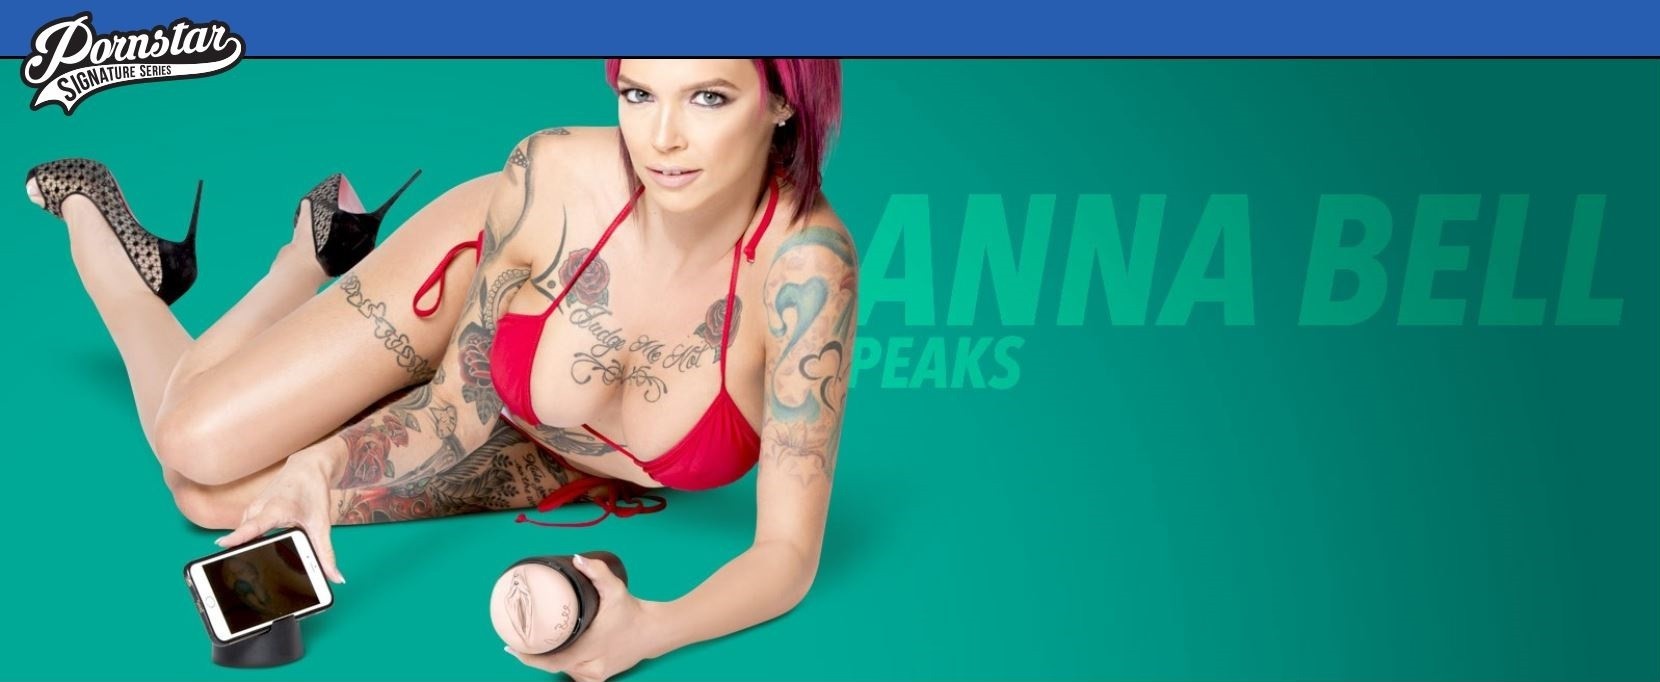 ananias trompies amukuyu recommends anna bell peaks fleshlight pic